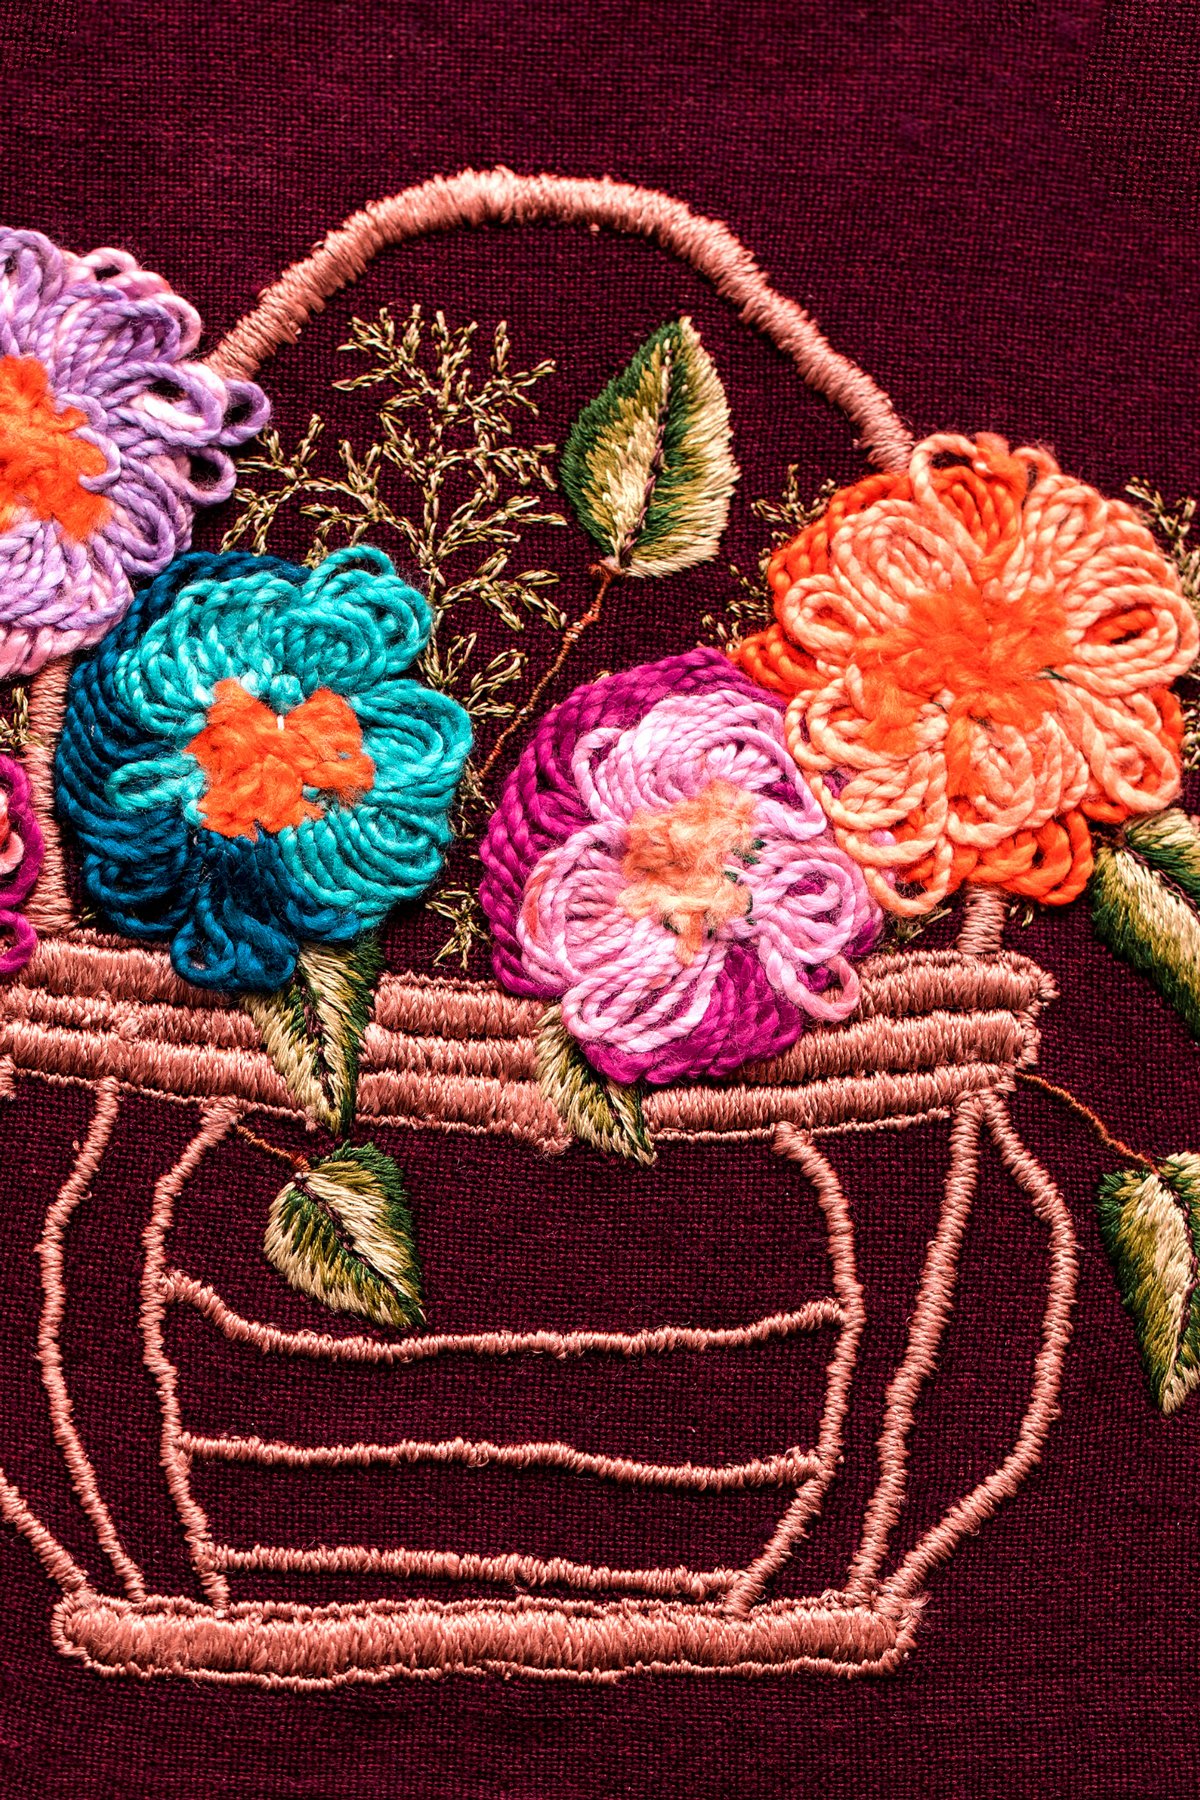 Puffy textured embroidery ideas flowers